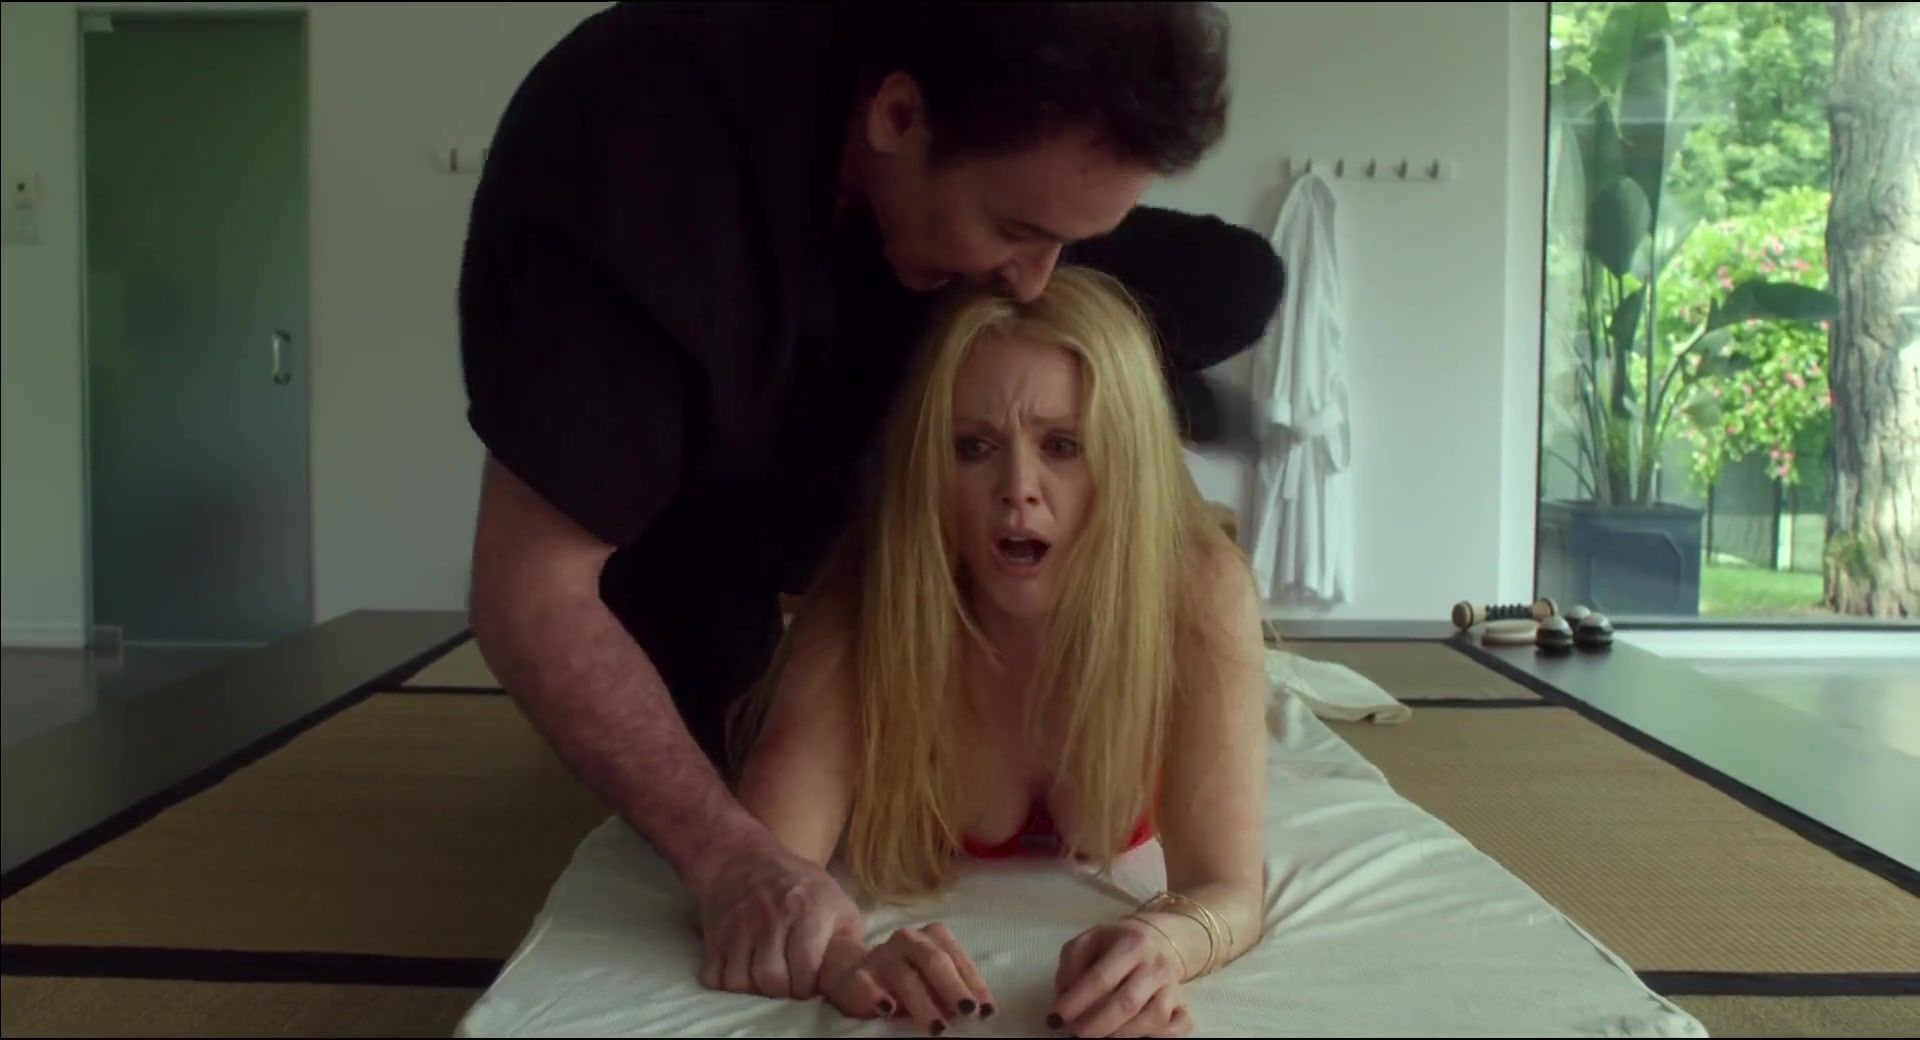 Rule34 Submission video & Lesbian Celebs Scene | Celebrity: Julianne Moore nude | The movie "Maps to the Stars" Tubent - 1